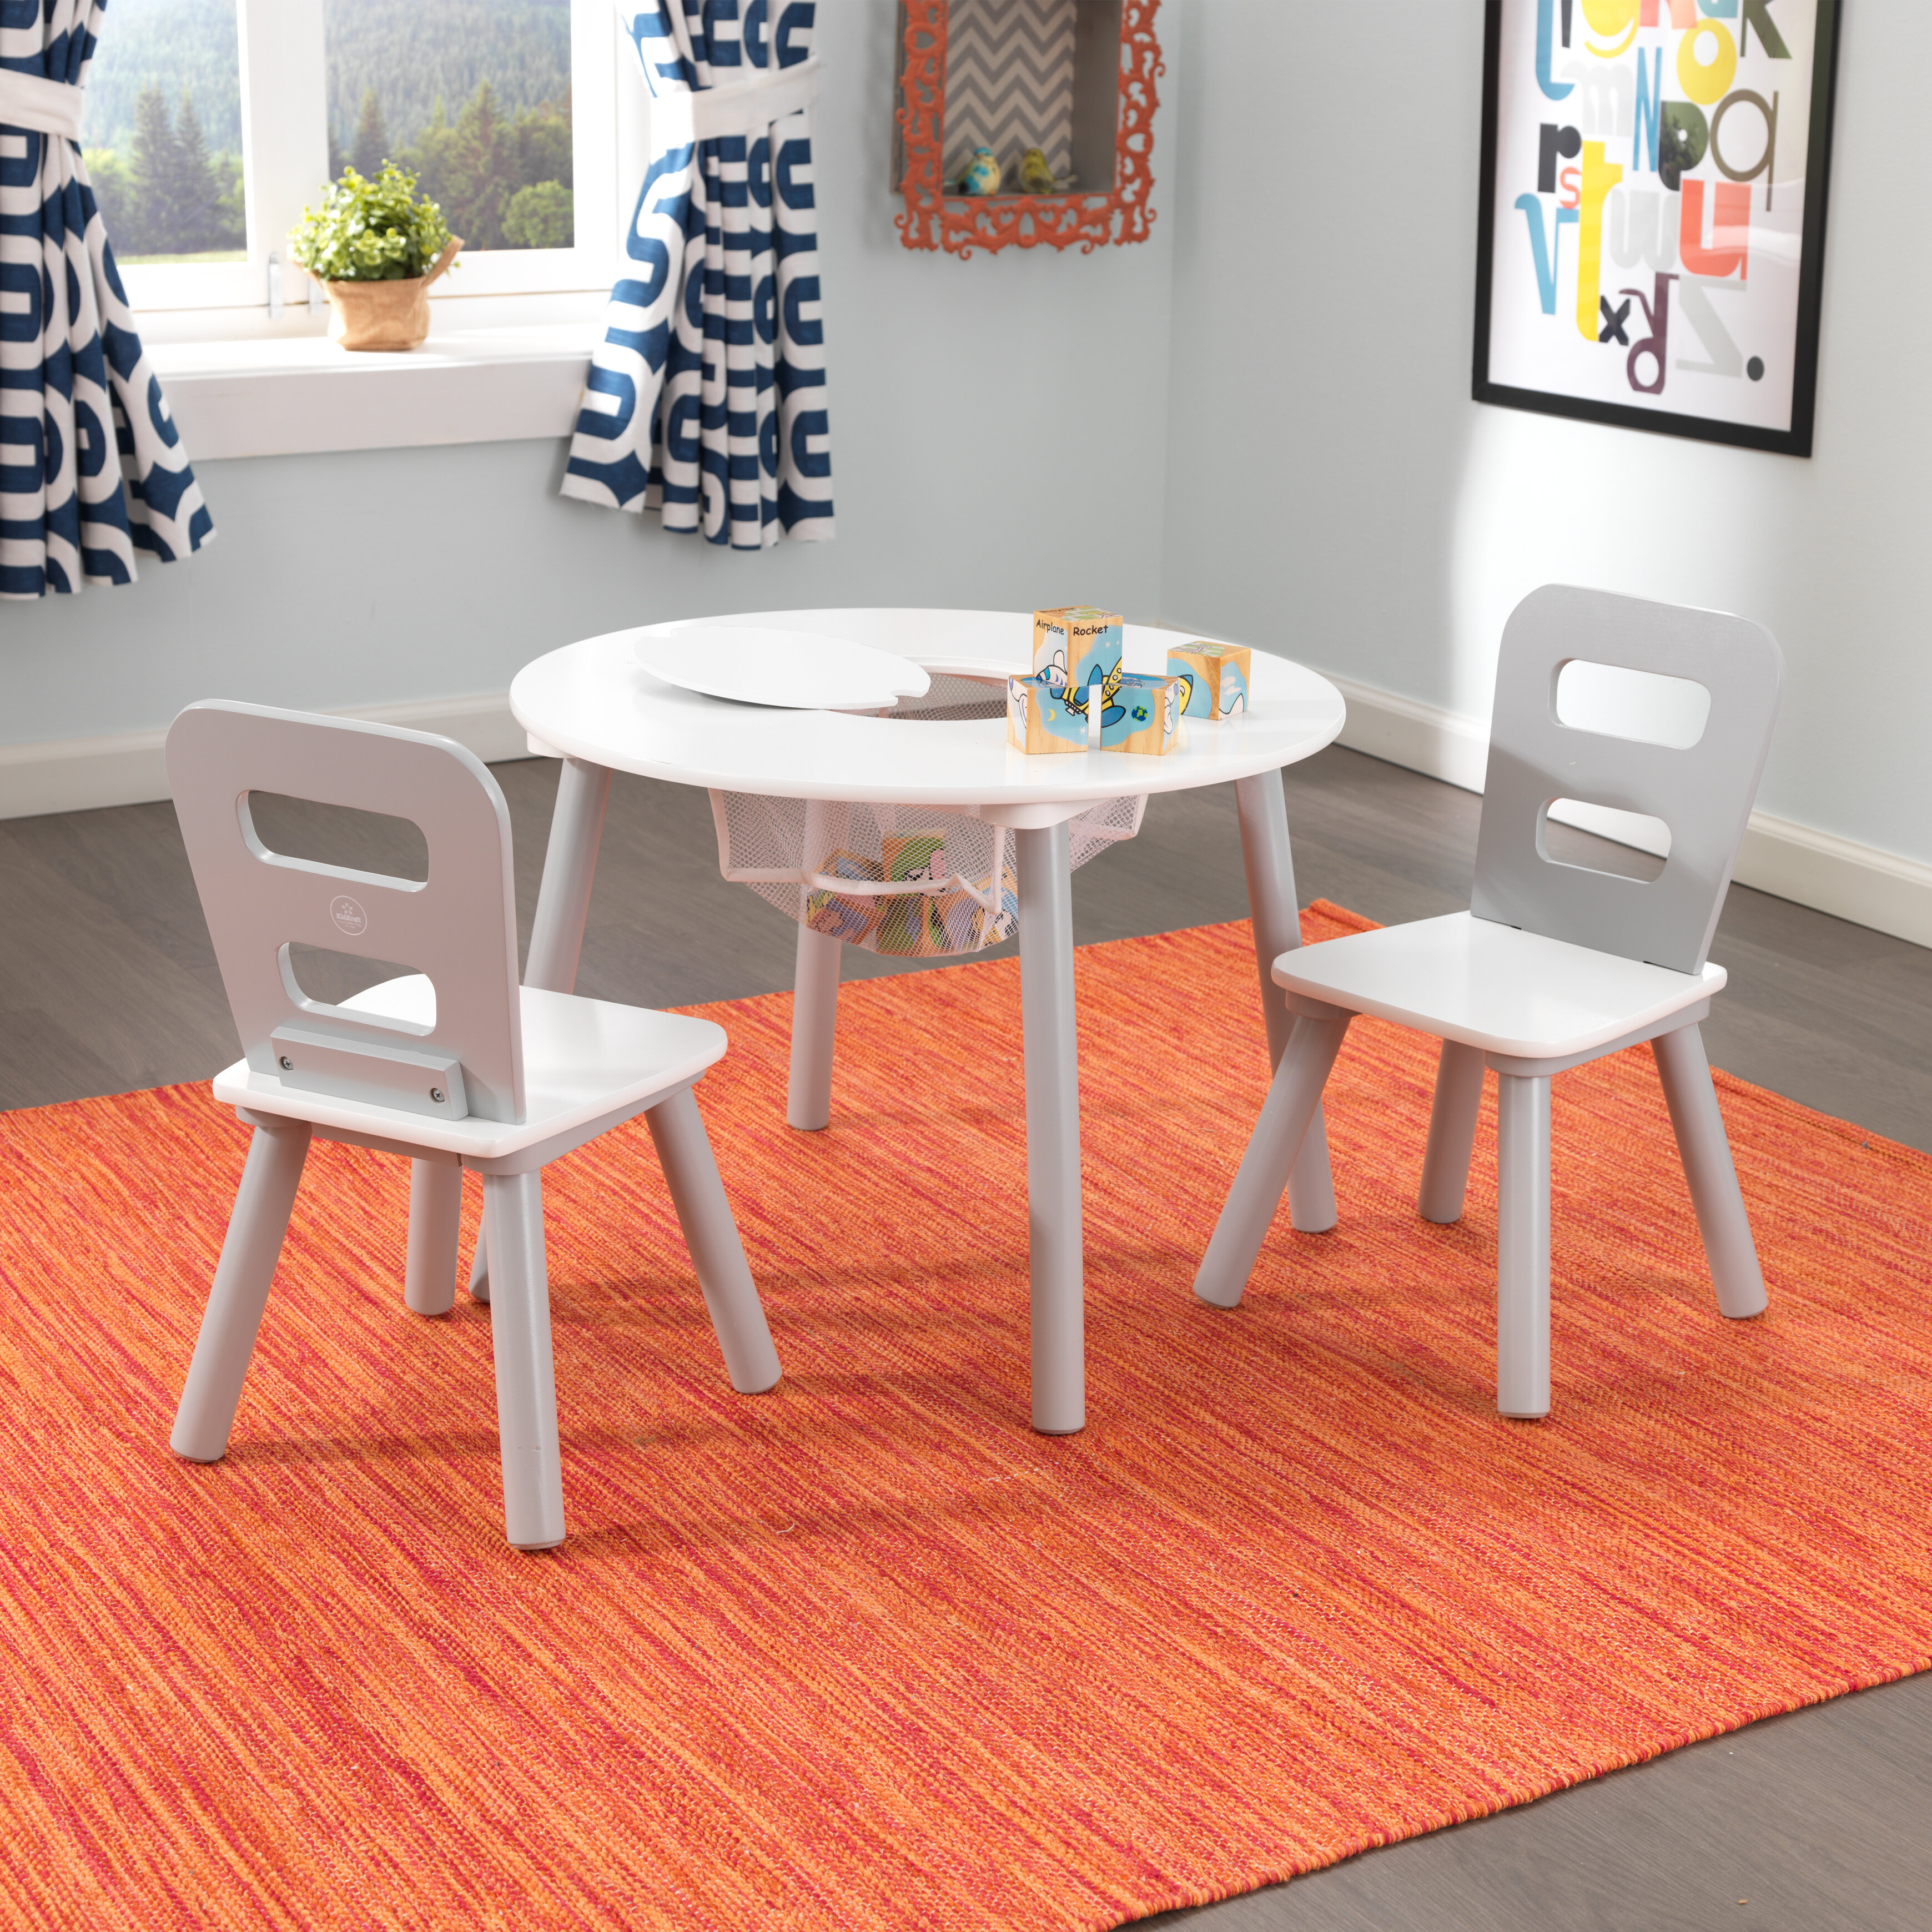 Kids Table Chairs & Bench Wooden Furniture Child's Set Play Room Playcorner 